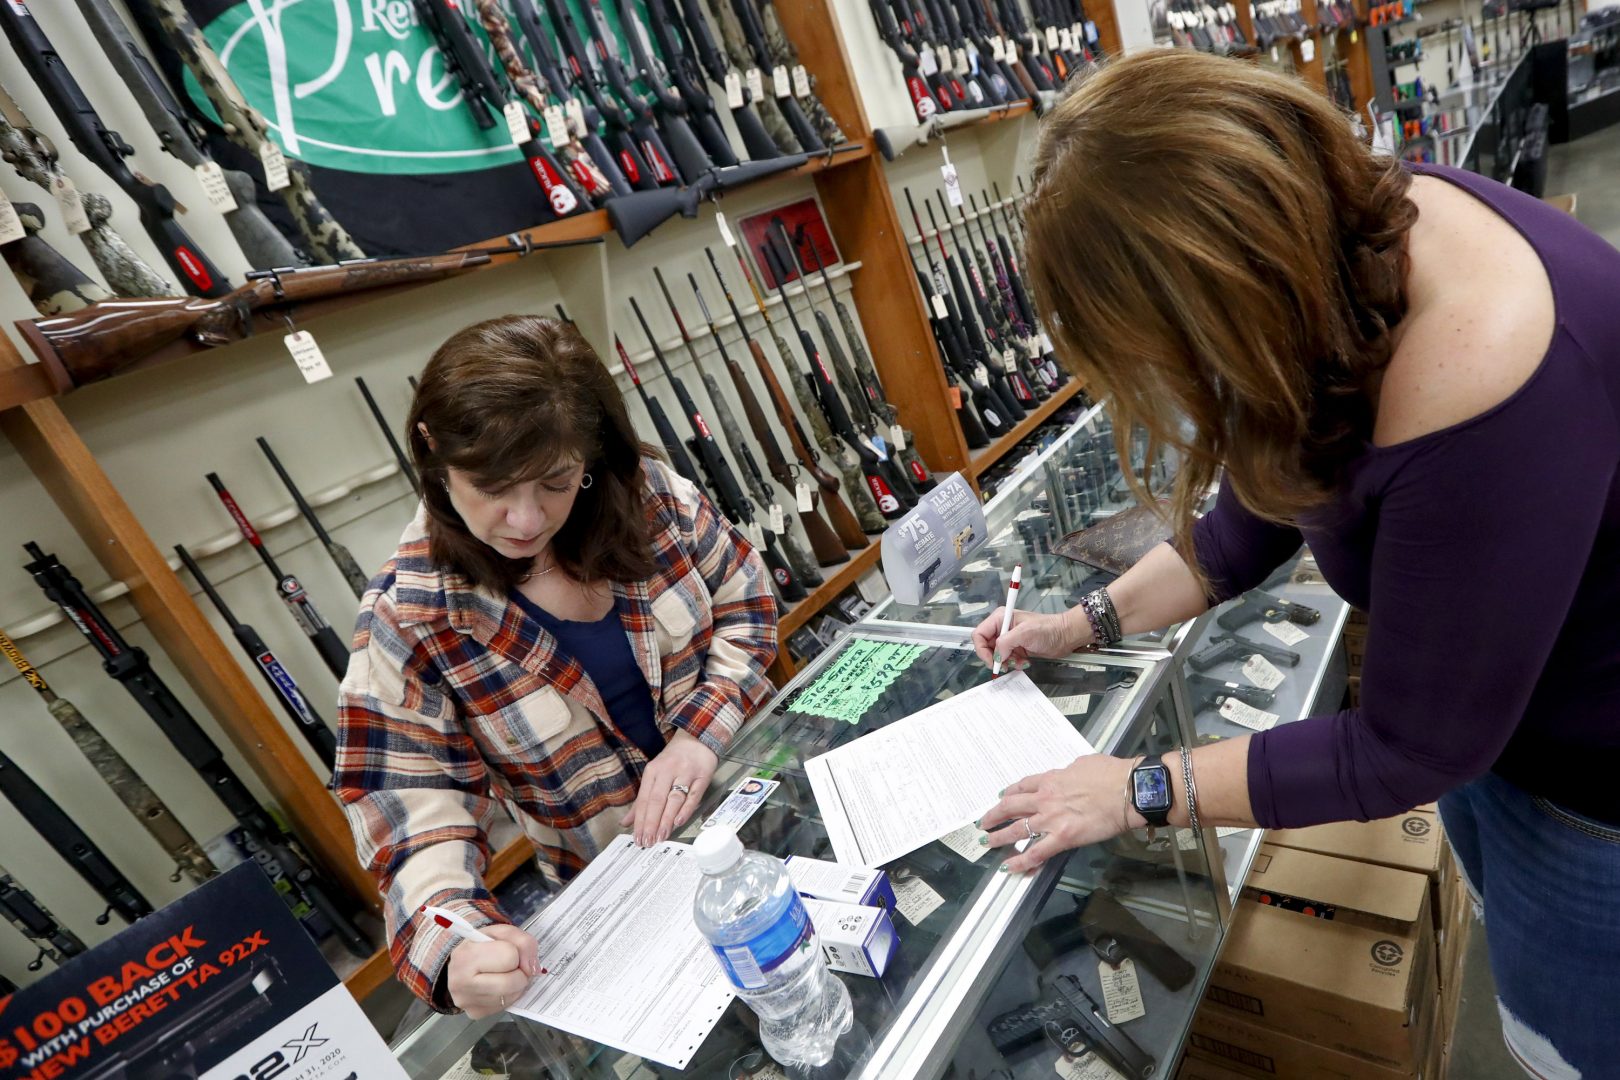 Andrea Schry, right, fills out the buyer part of legal forms to buy a handgun as shop worker Missy Morosky fills out the vendors parts after Dukes Sport Shop reopened, Wednesday, March 25, 2020, in New Castle, Pa.  